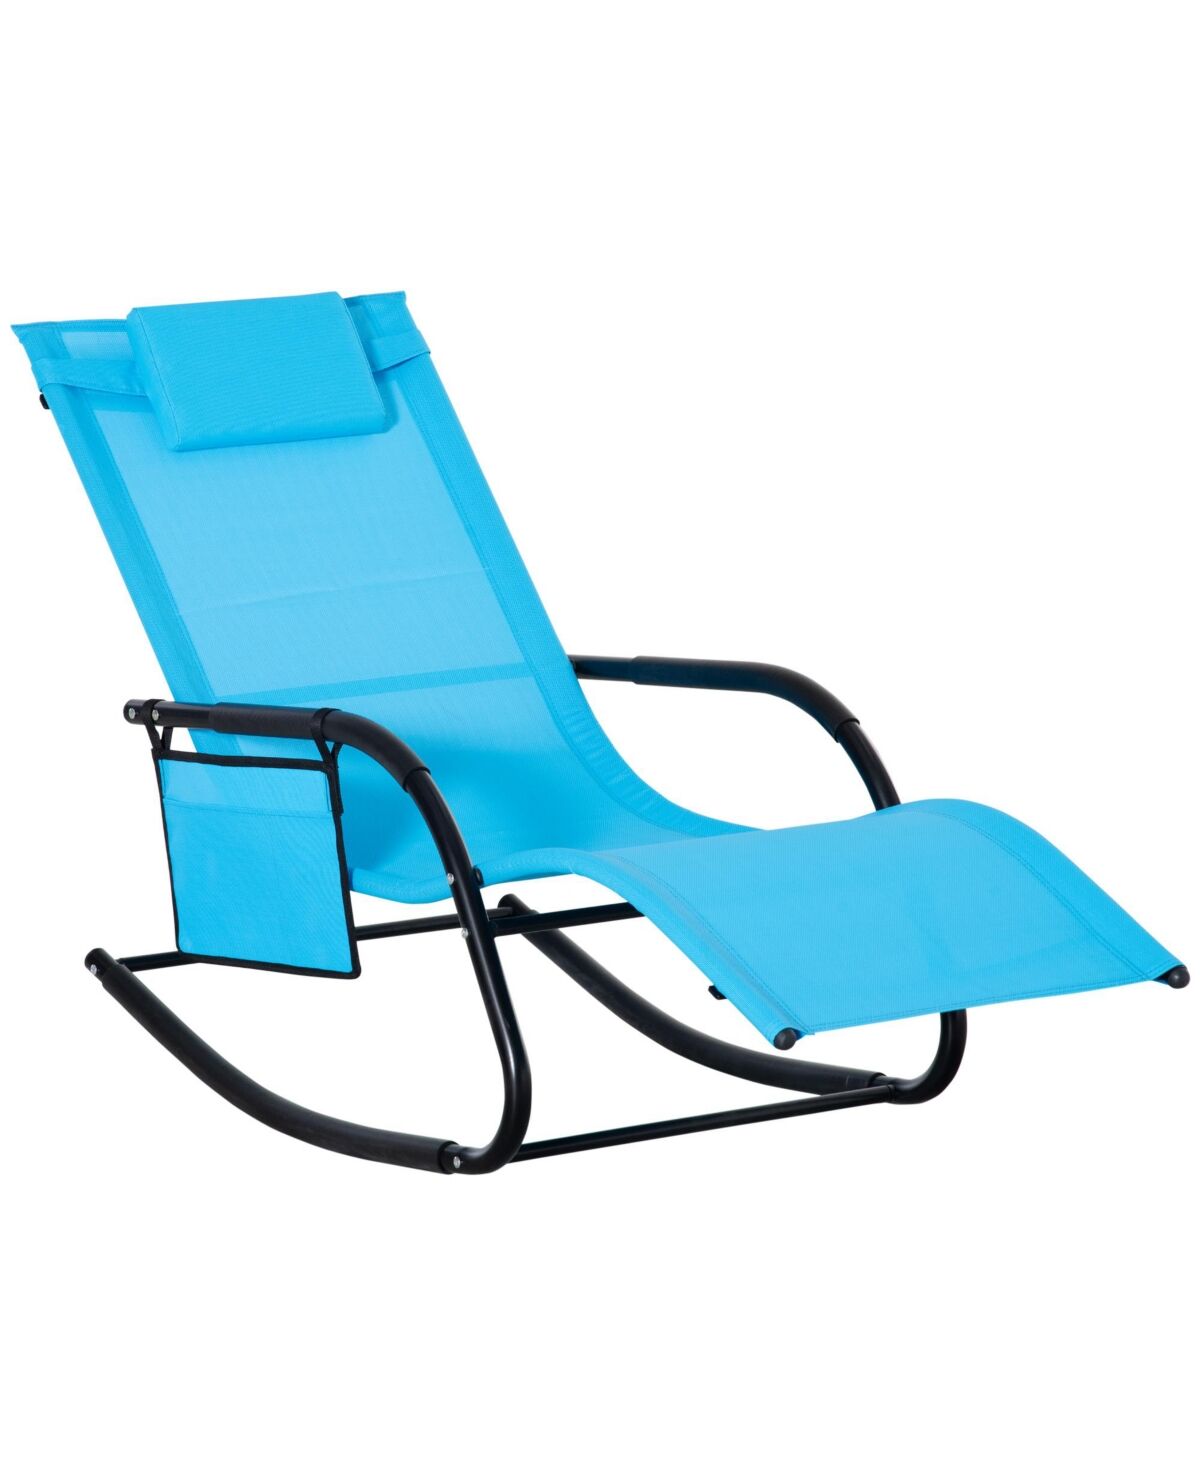 Outsunny Outdoor Rocking Chair, Patio Sling Sun Lounger, Pocket, Recliner Rocker, Lounge Chair with Detachable Pillow for Deck, Garden, or Pool, Blue